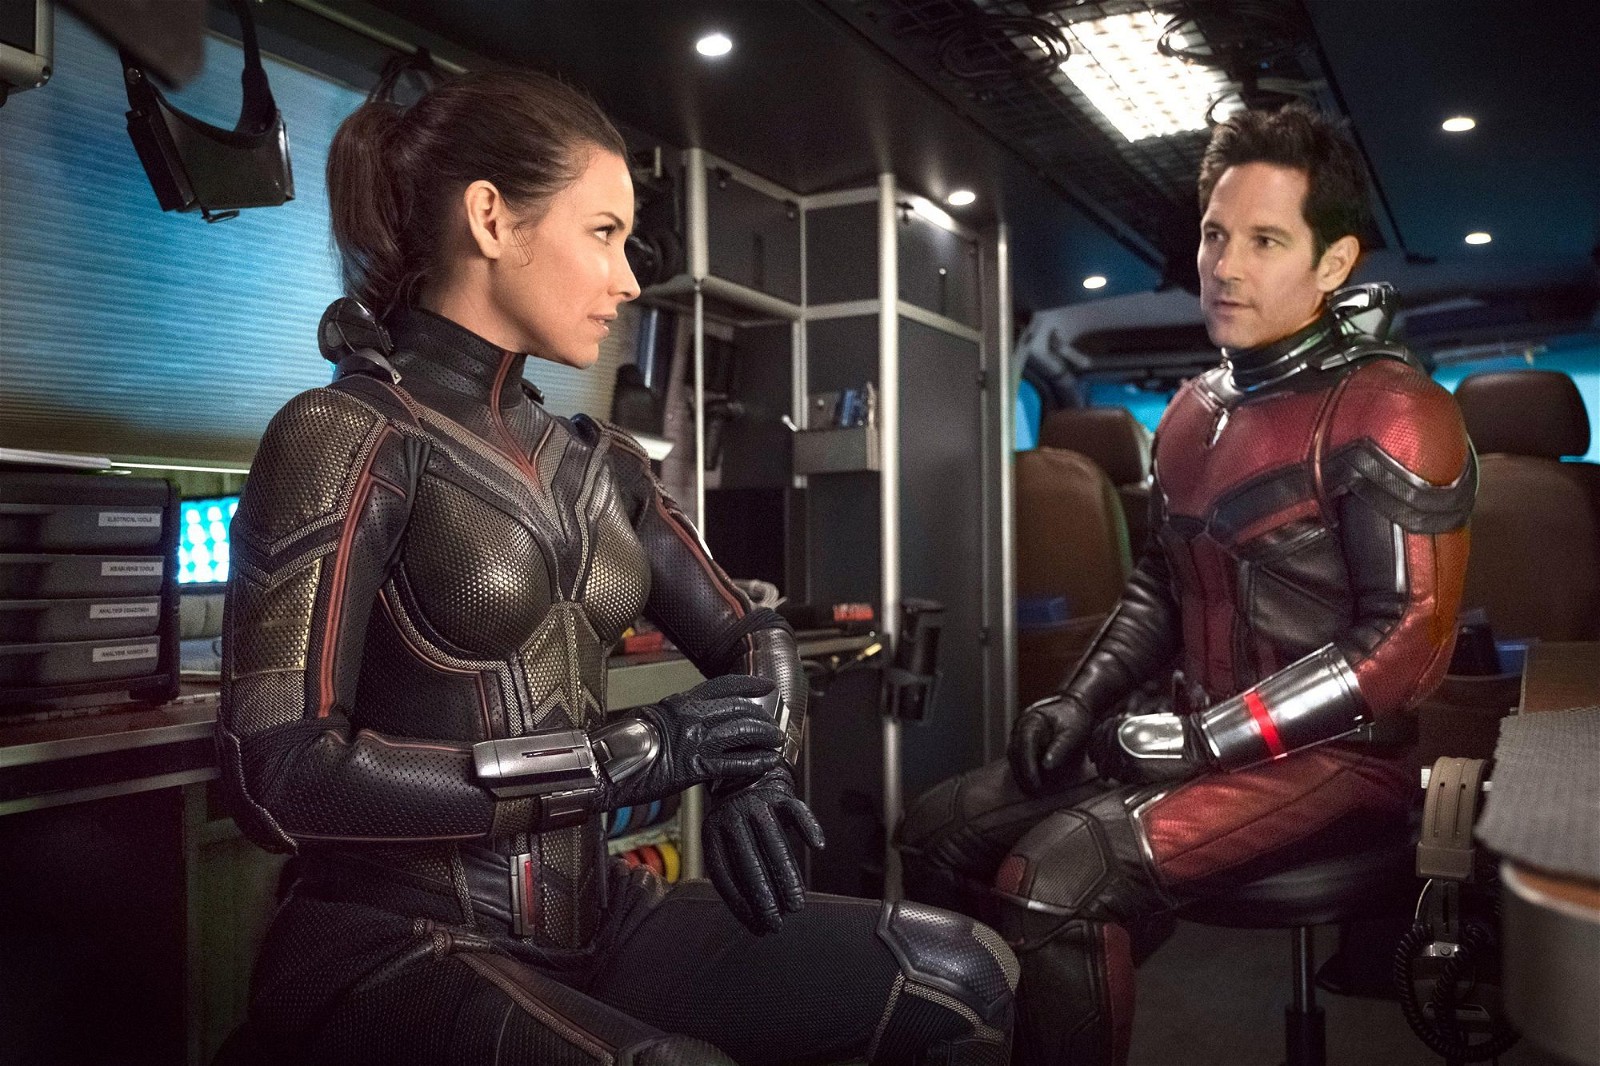 Paul Rudd and Evangeline Lilly as Ant-Man and the Wasp